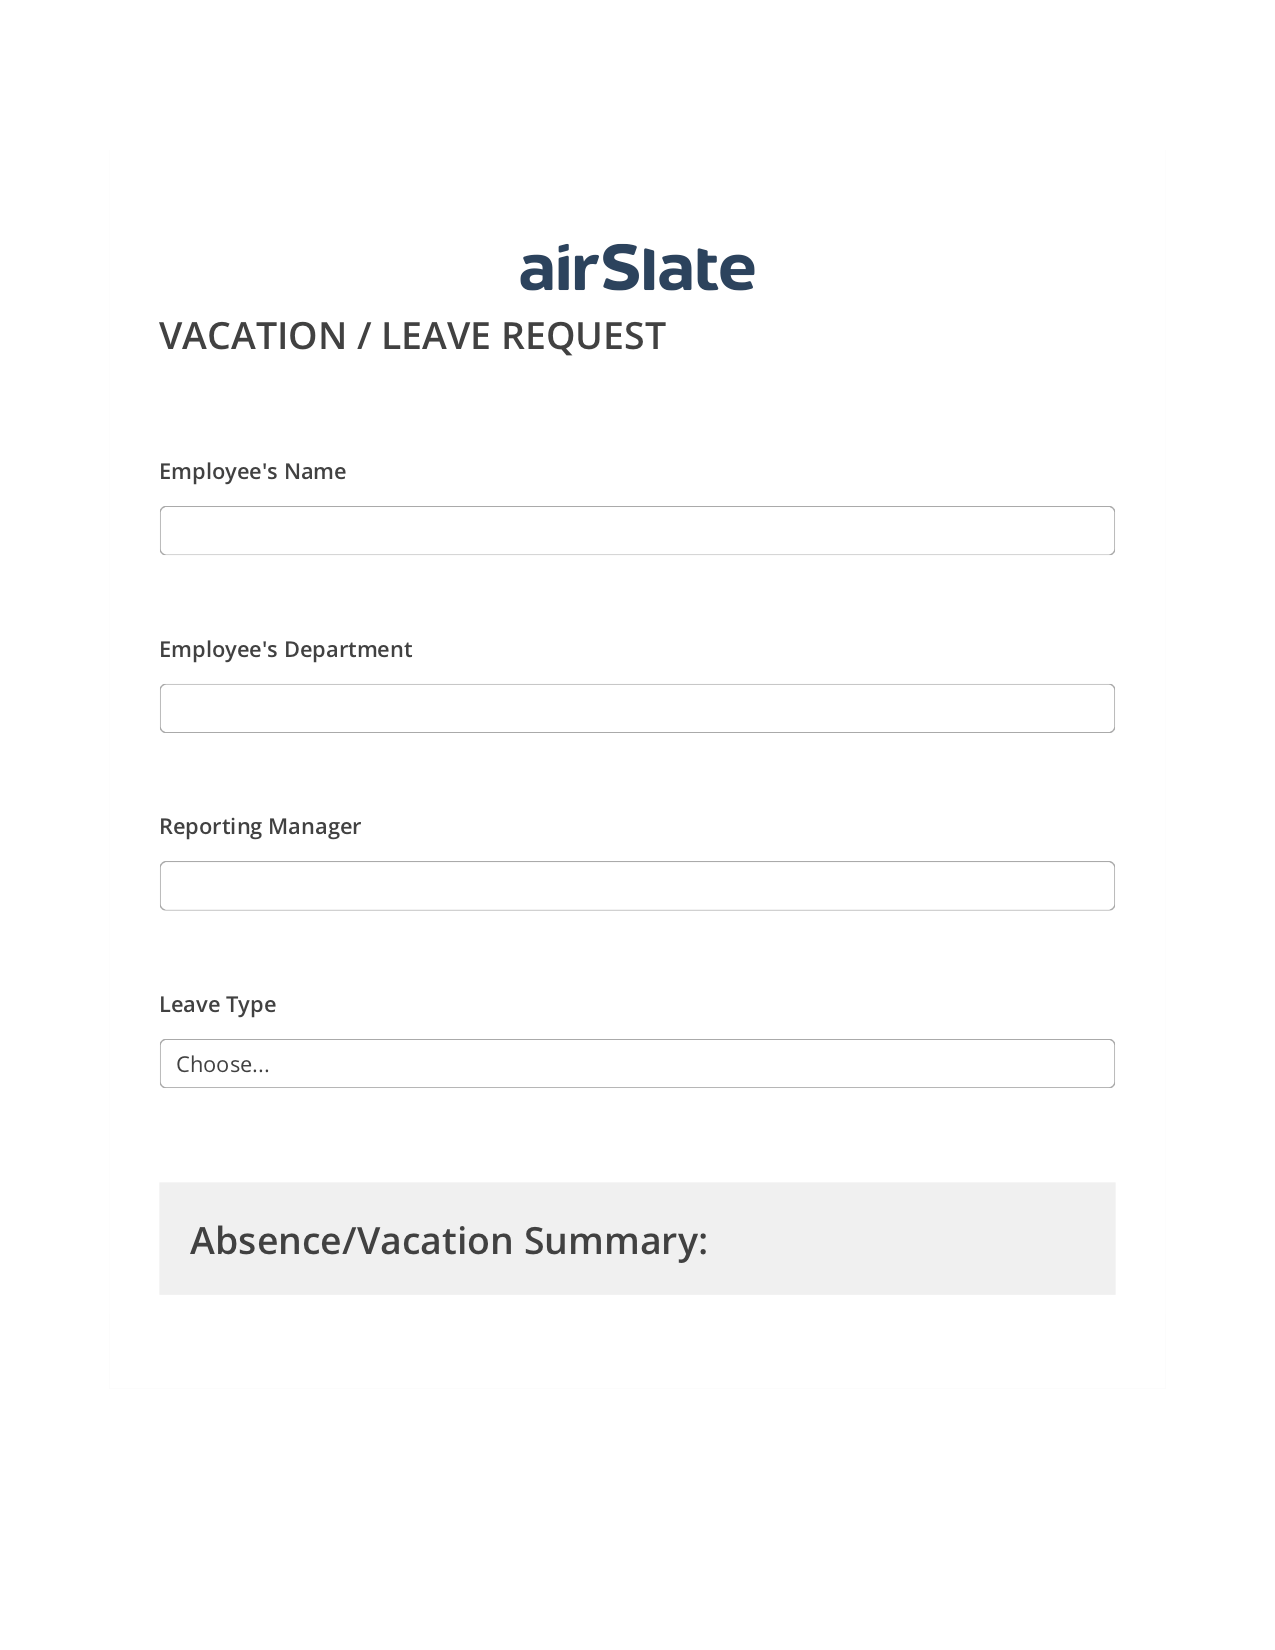 Multirole Vacation/Leave Request Workflow Pre-fill from CSV File Bot, Remove Slate Bot, Export to Google Sheet Bot